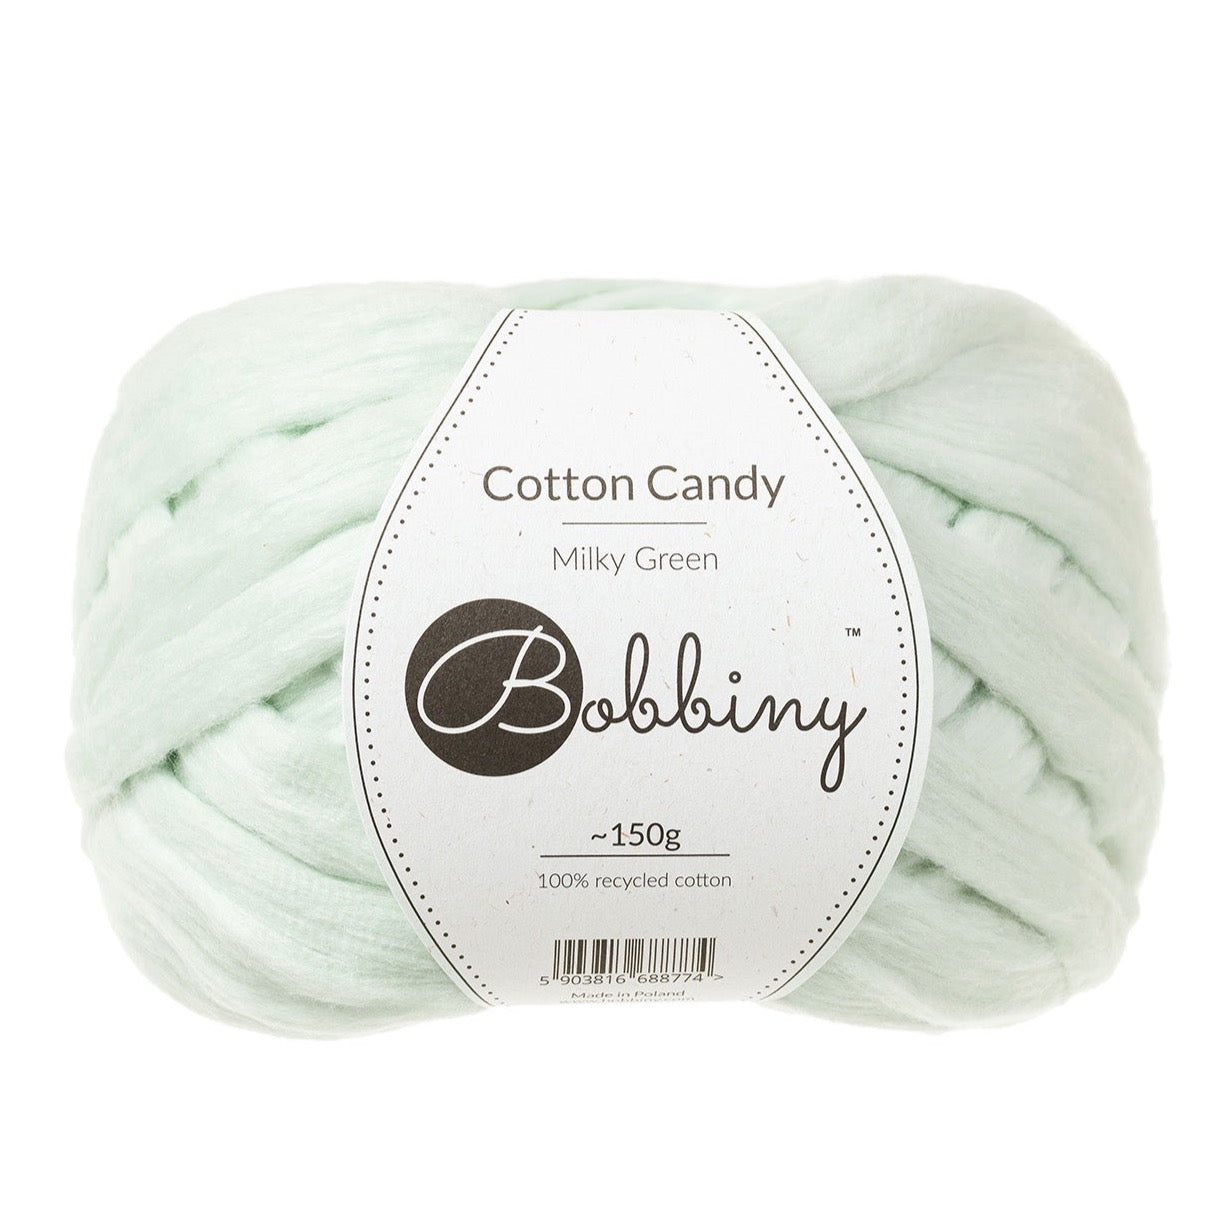 Milky green cotton candy 100% recycled fibre for weaving